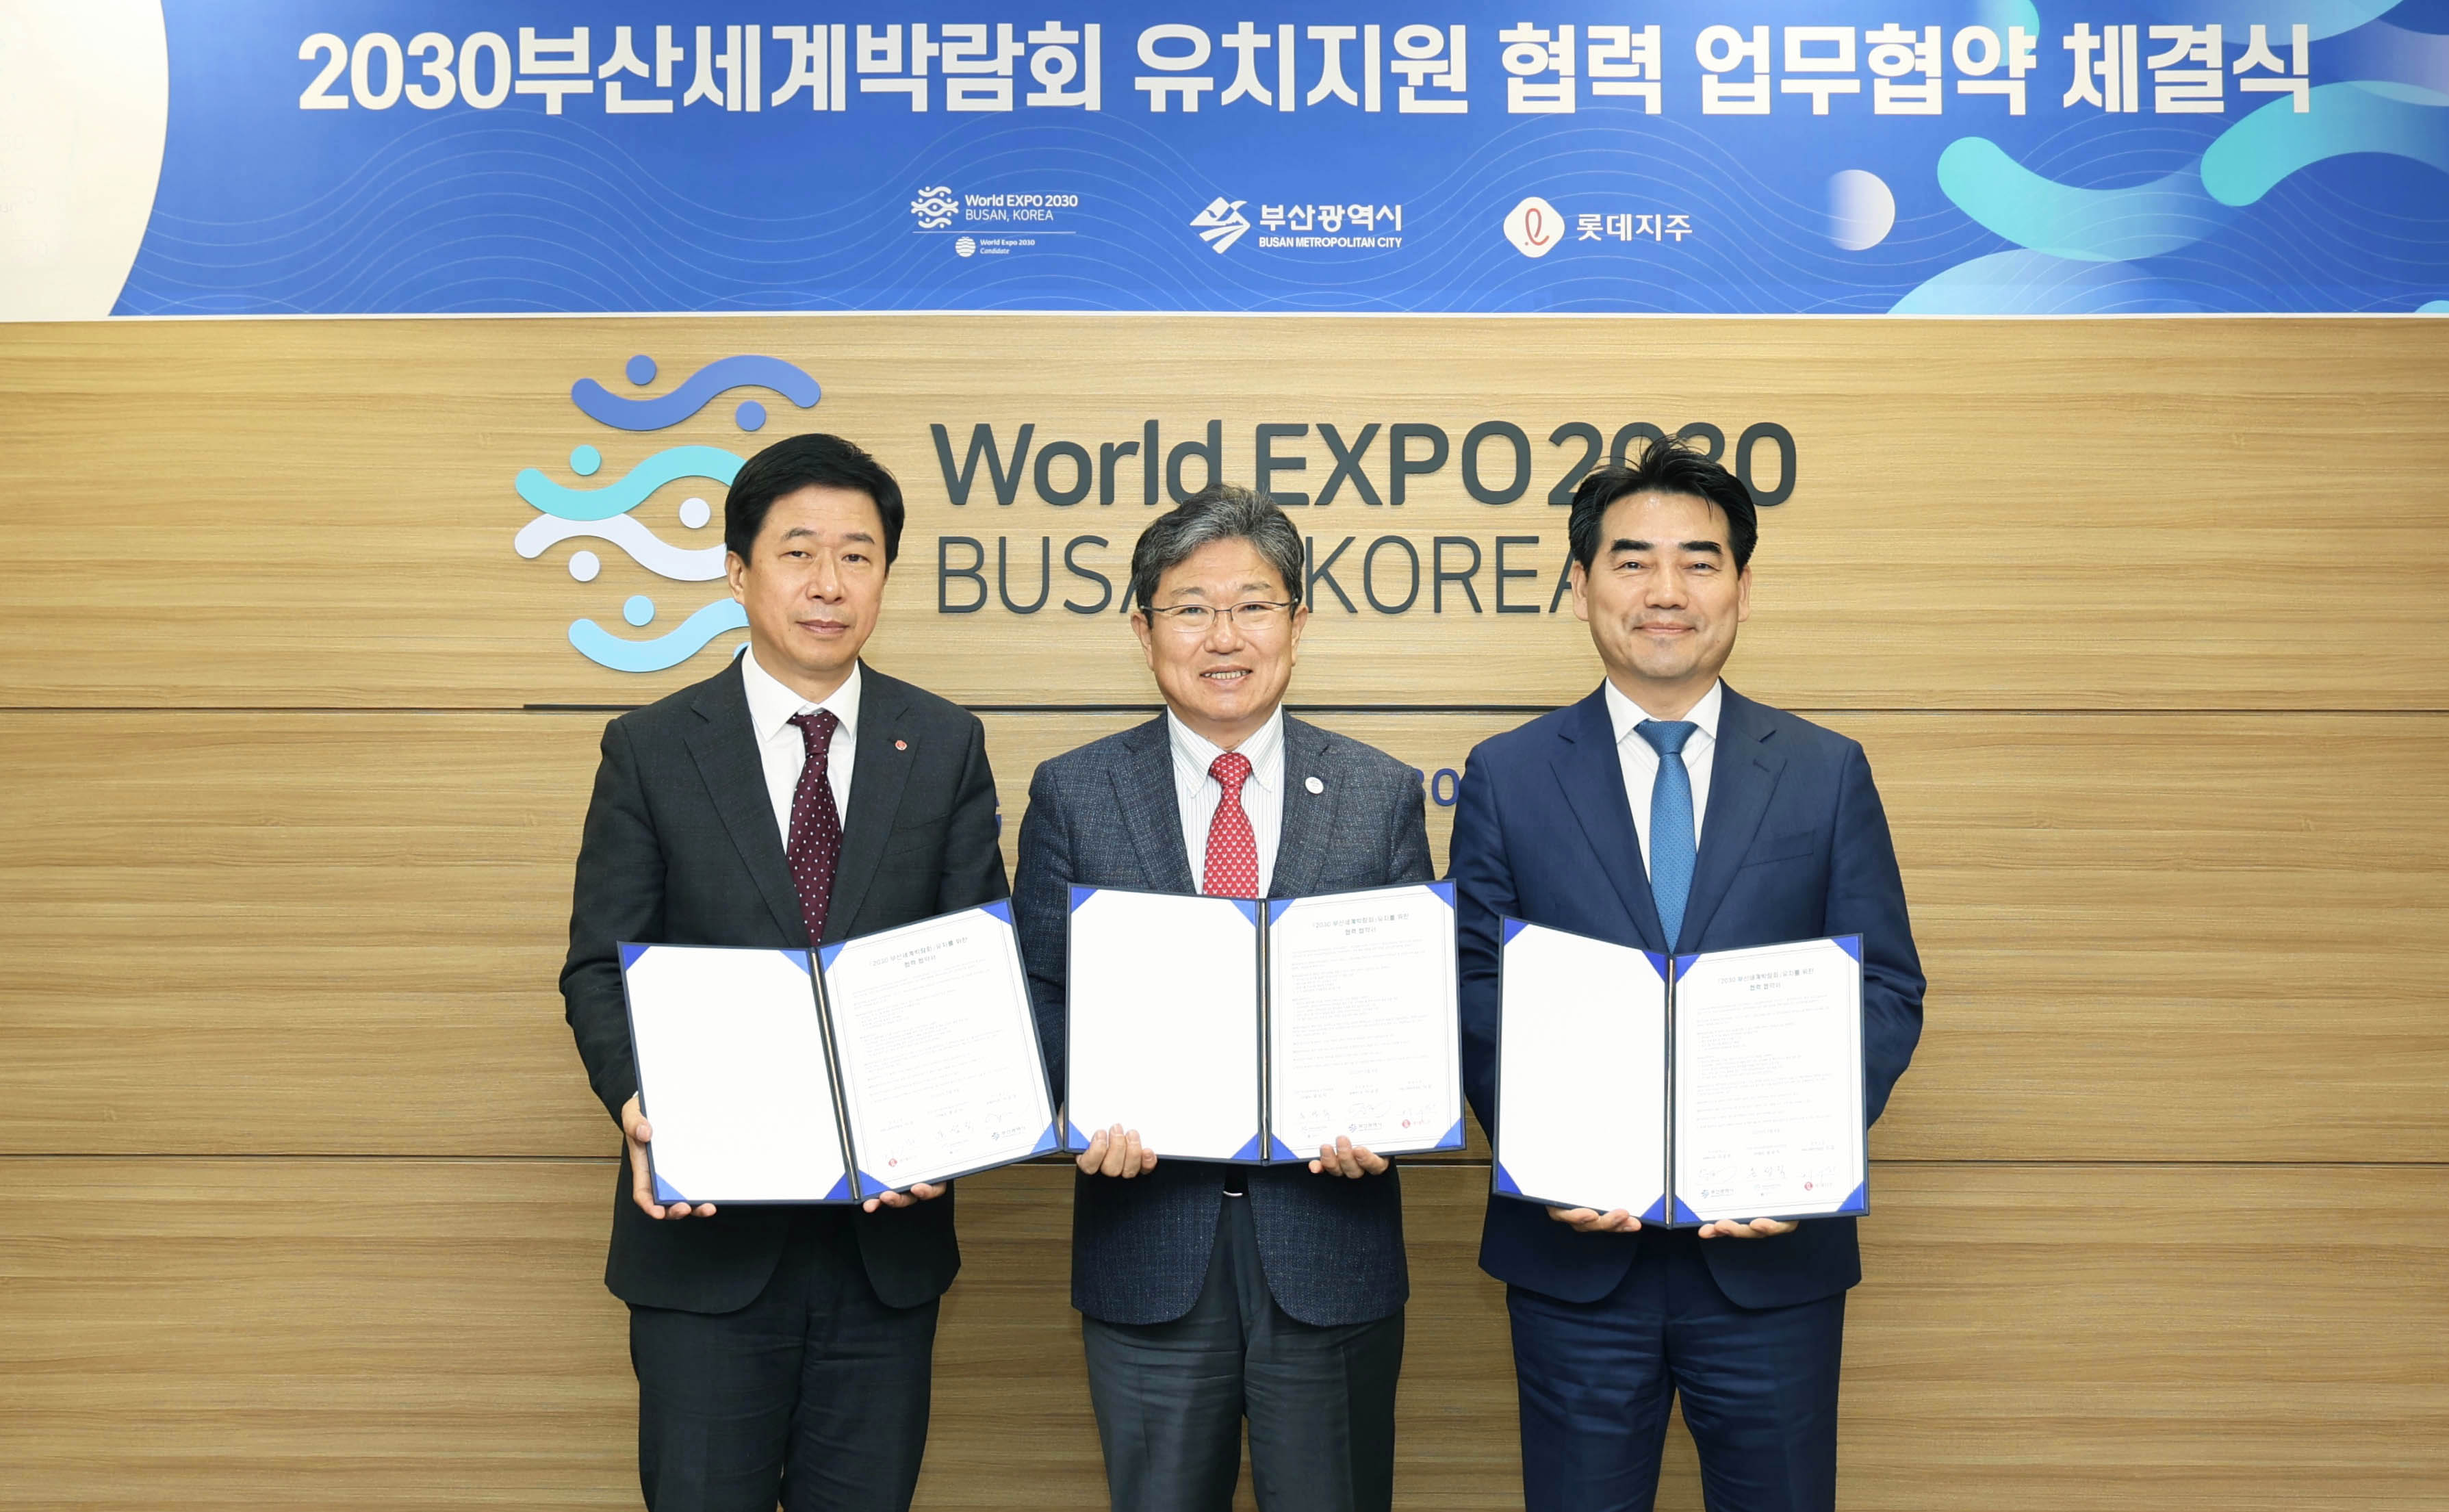 World Expo 2030 Busan Bid Committee signs MOU with Busan City and Lotte for joint promotion